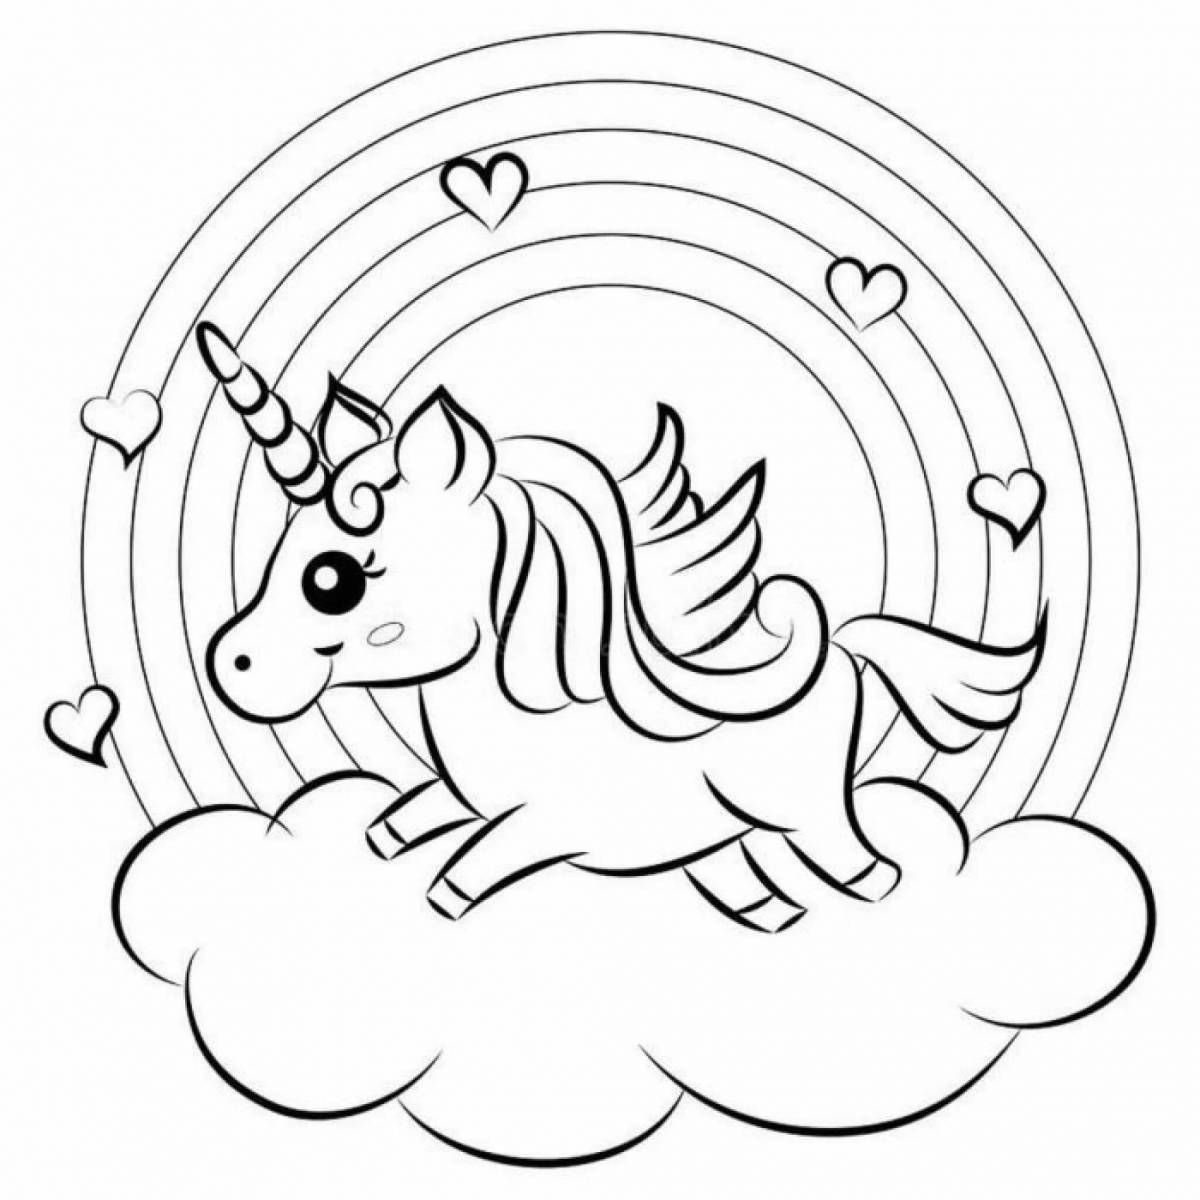 Brightly colored unicorn coloring page